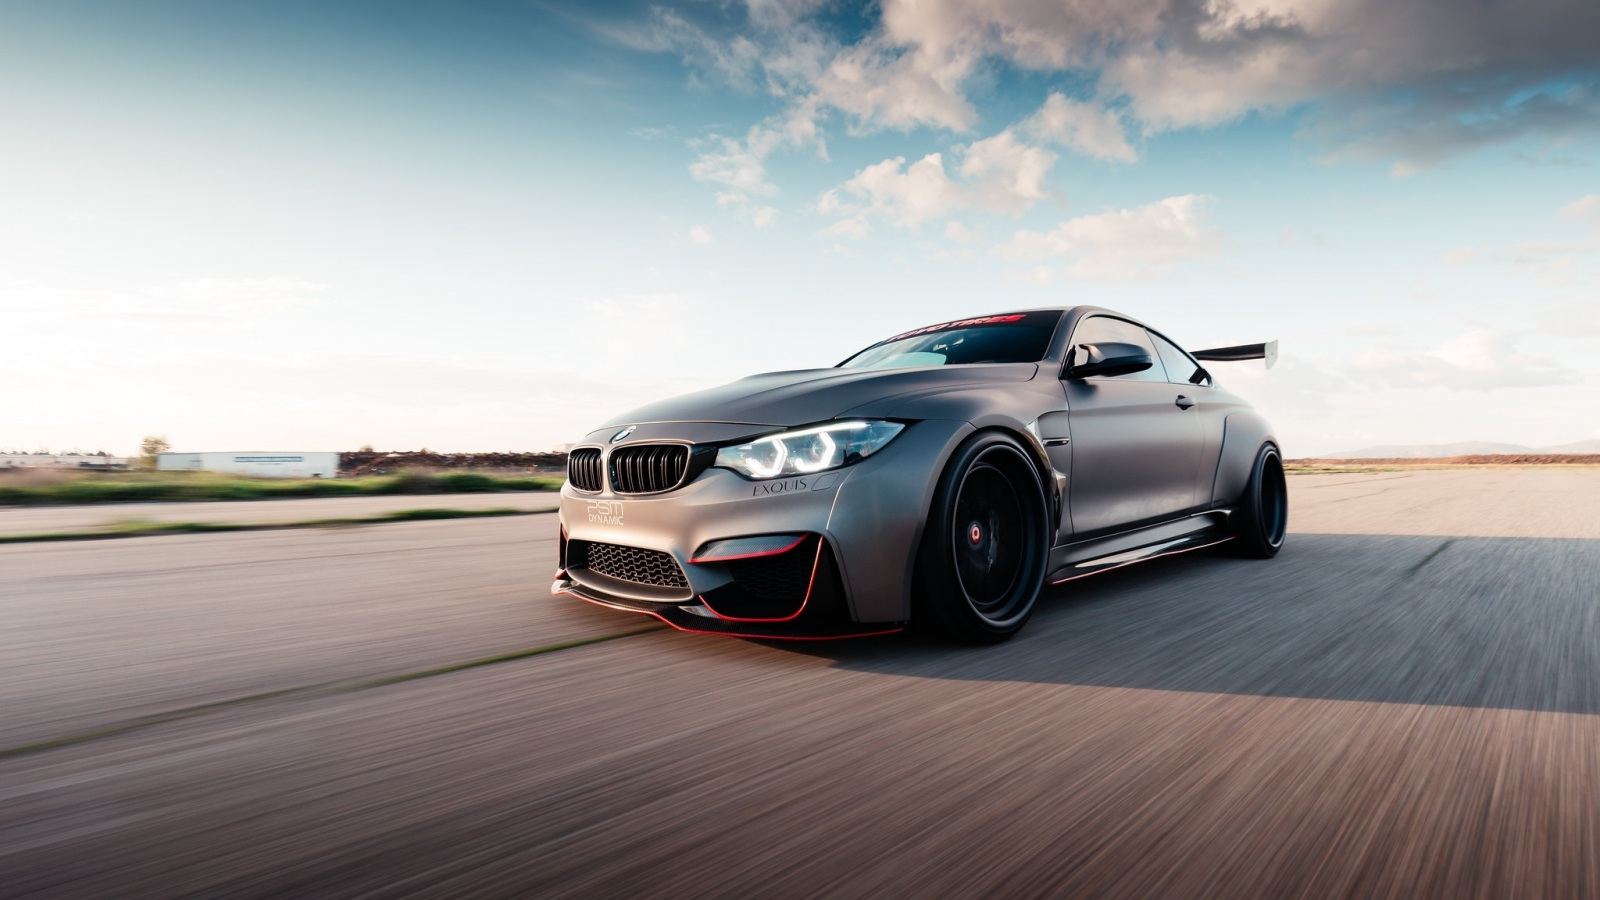 Download 1600x900 Wallpaper Bmw M4 On Road Luxurious Car Widescreen 16 9 Widescreen 1600x900 Hd Image Background 20996